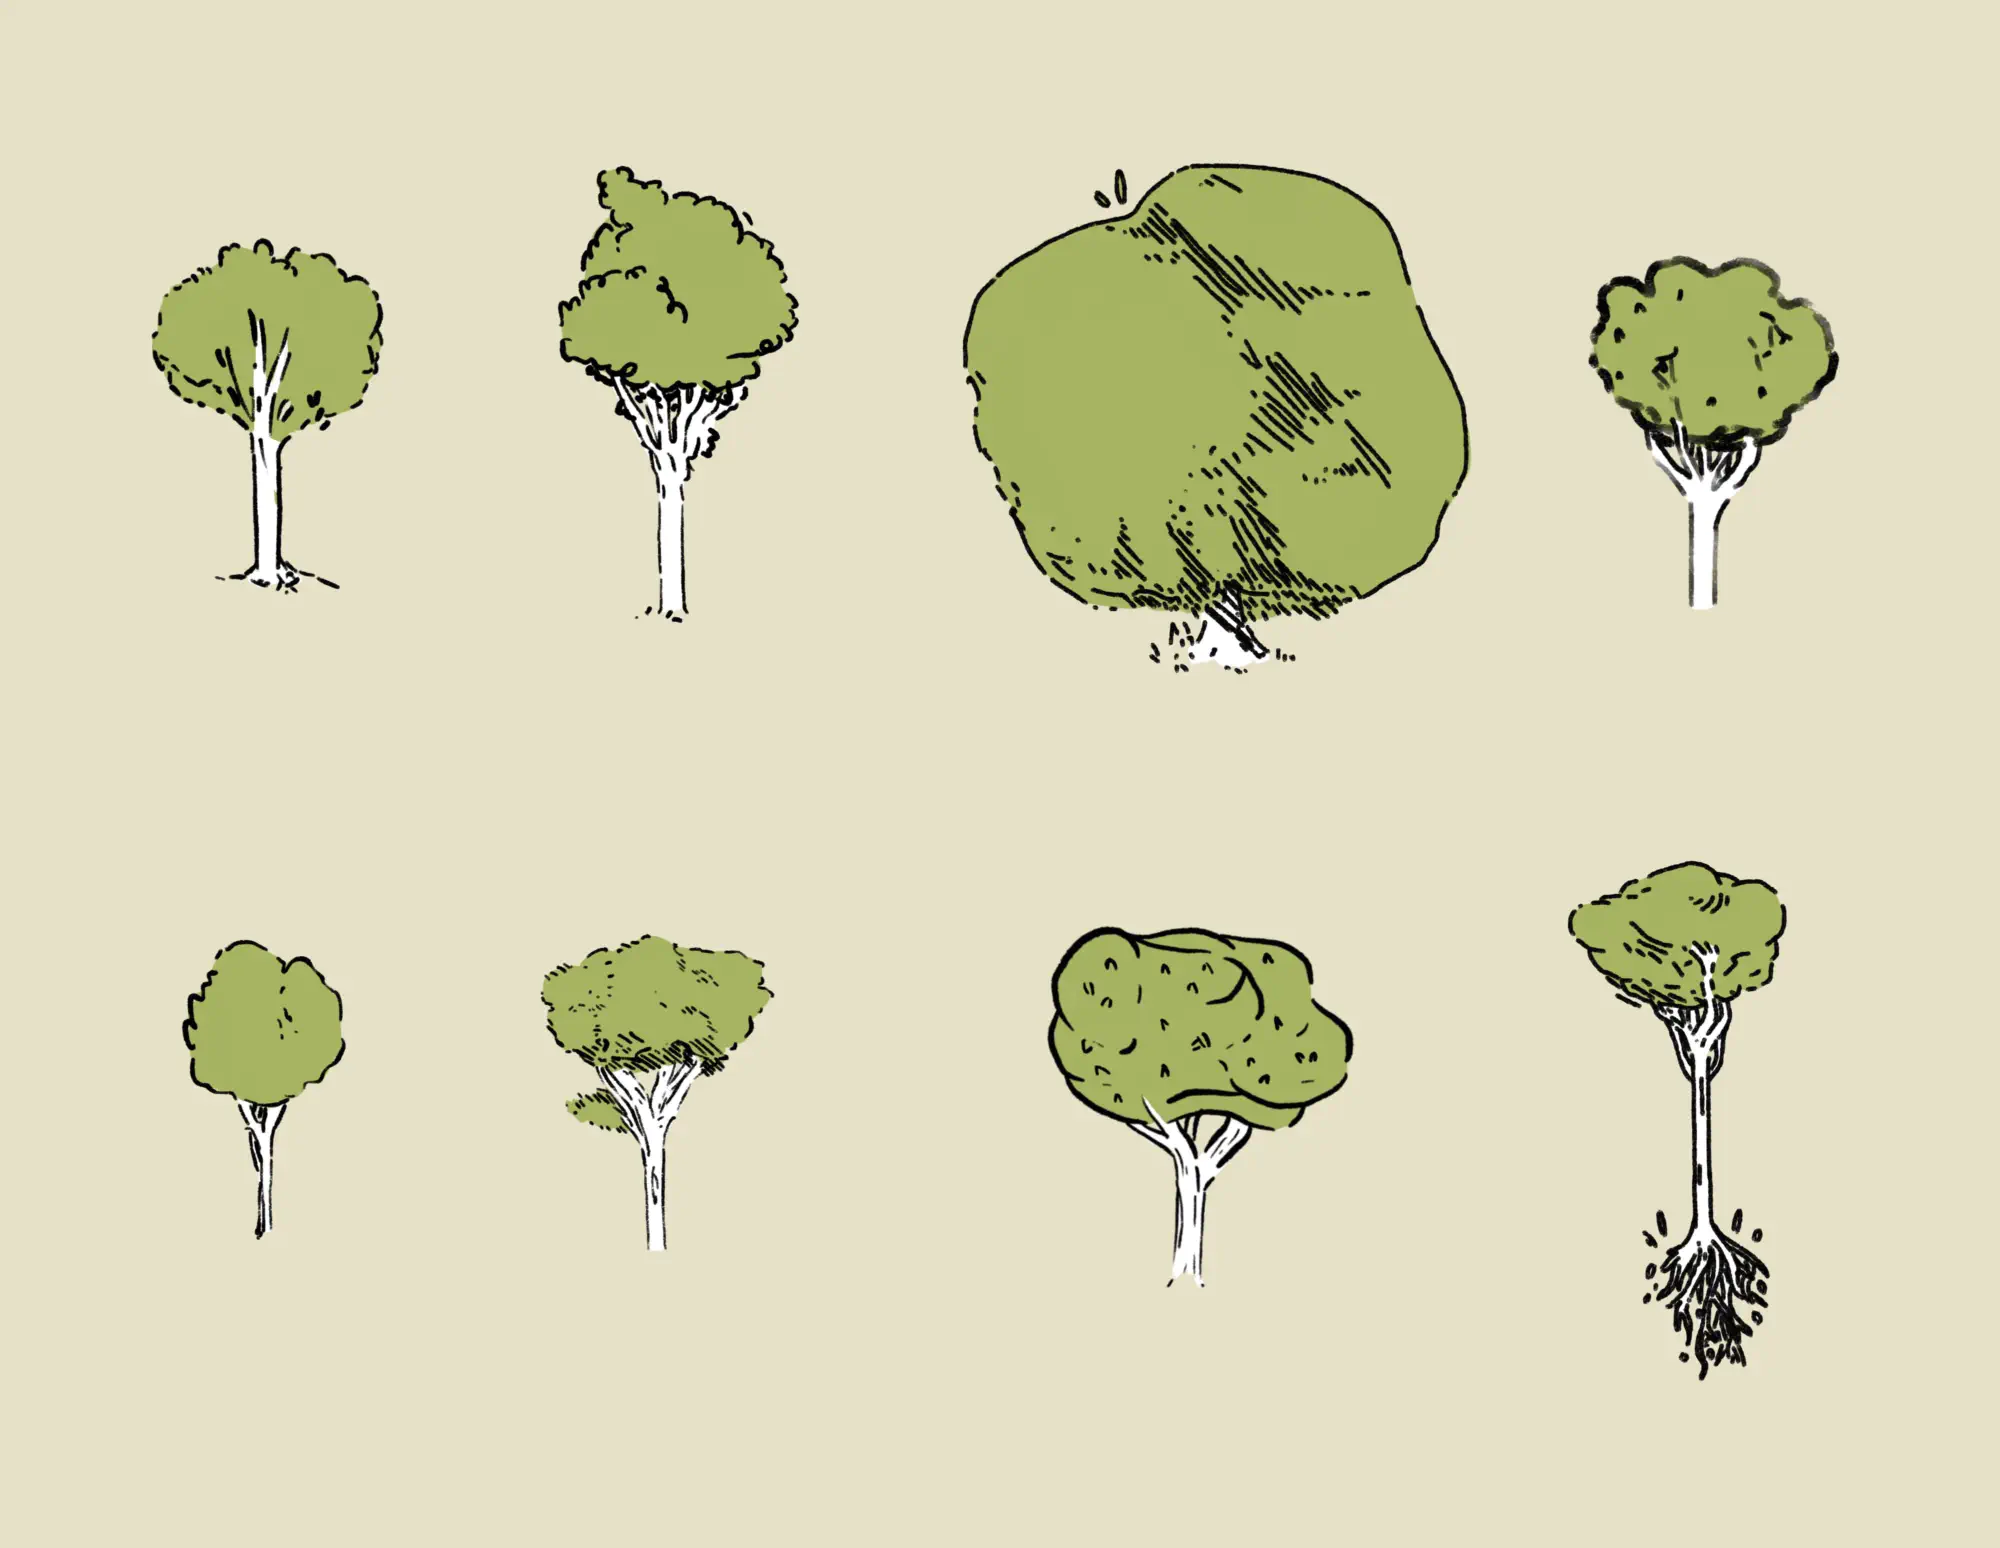  No matter growing up around the forest, I still think there are a million ways to draw a tree.
 